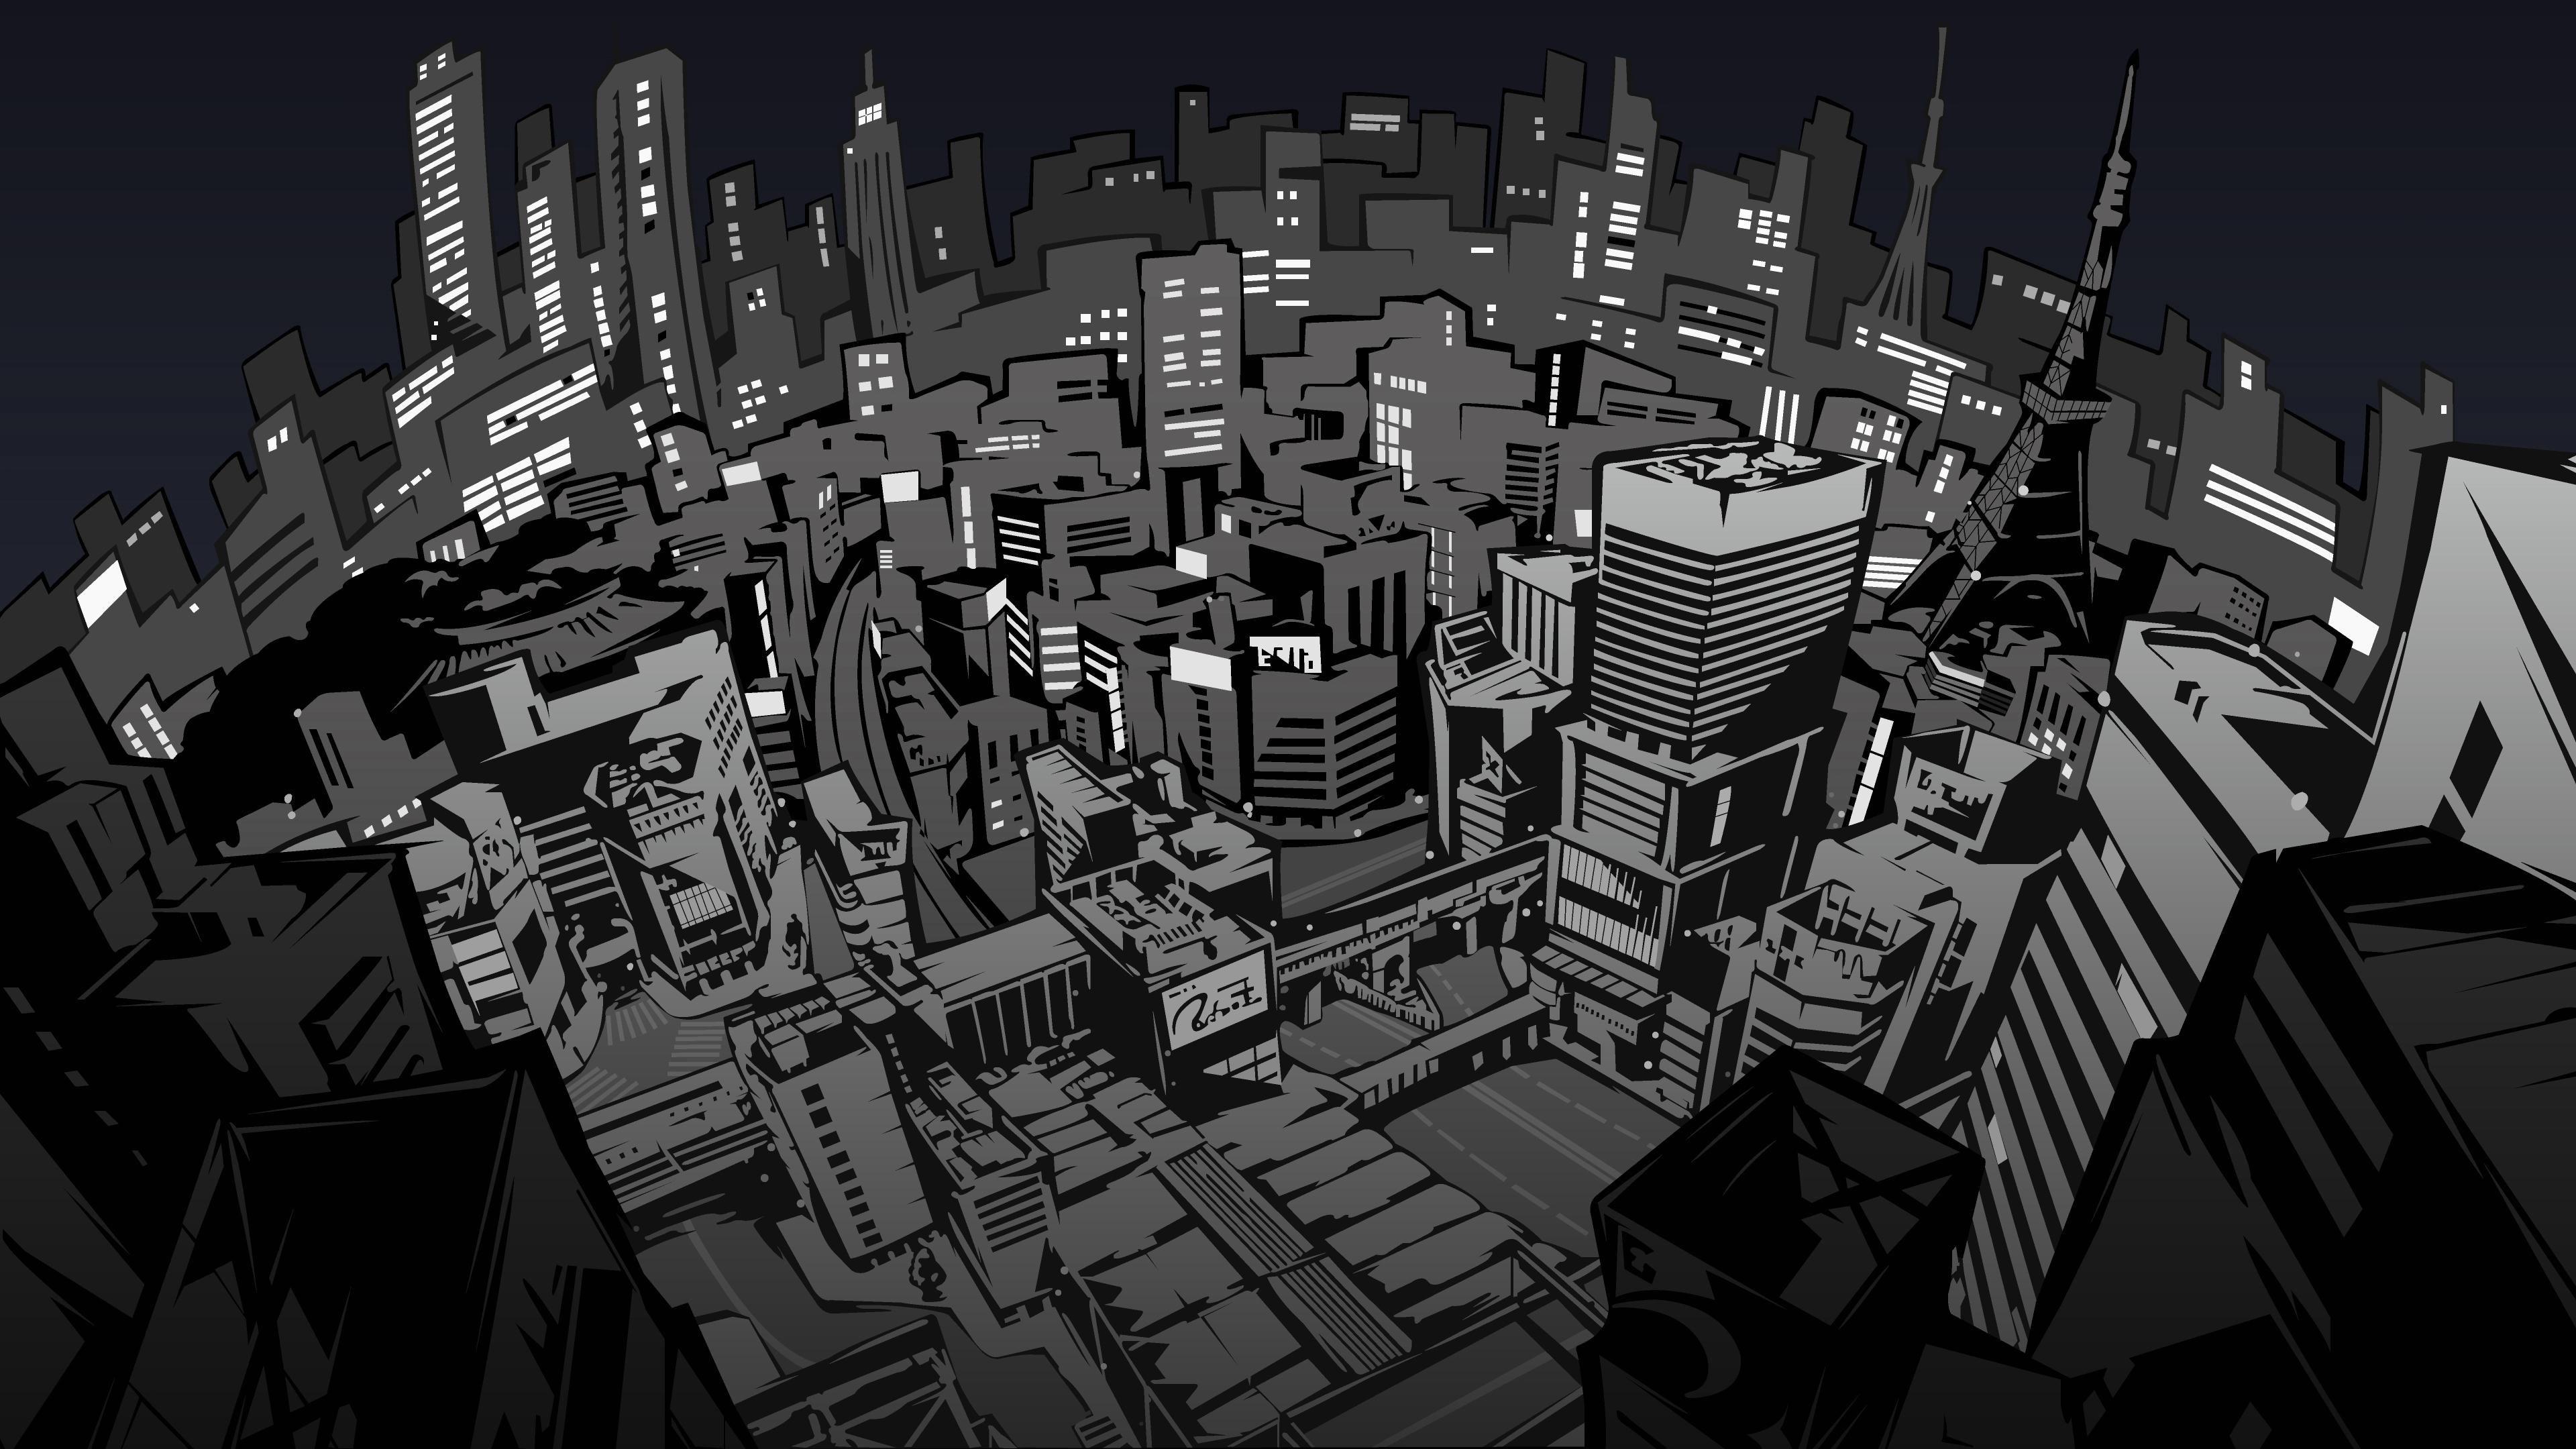 Wallpaper  anime Persona 5 cityscape city water noir 2896x2896   Andrexx3008  1931391  HD Wallpapers  WallHere